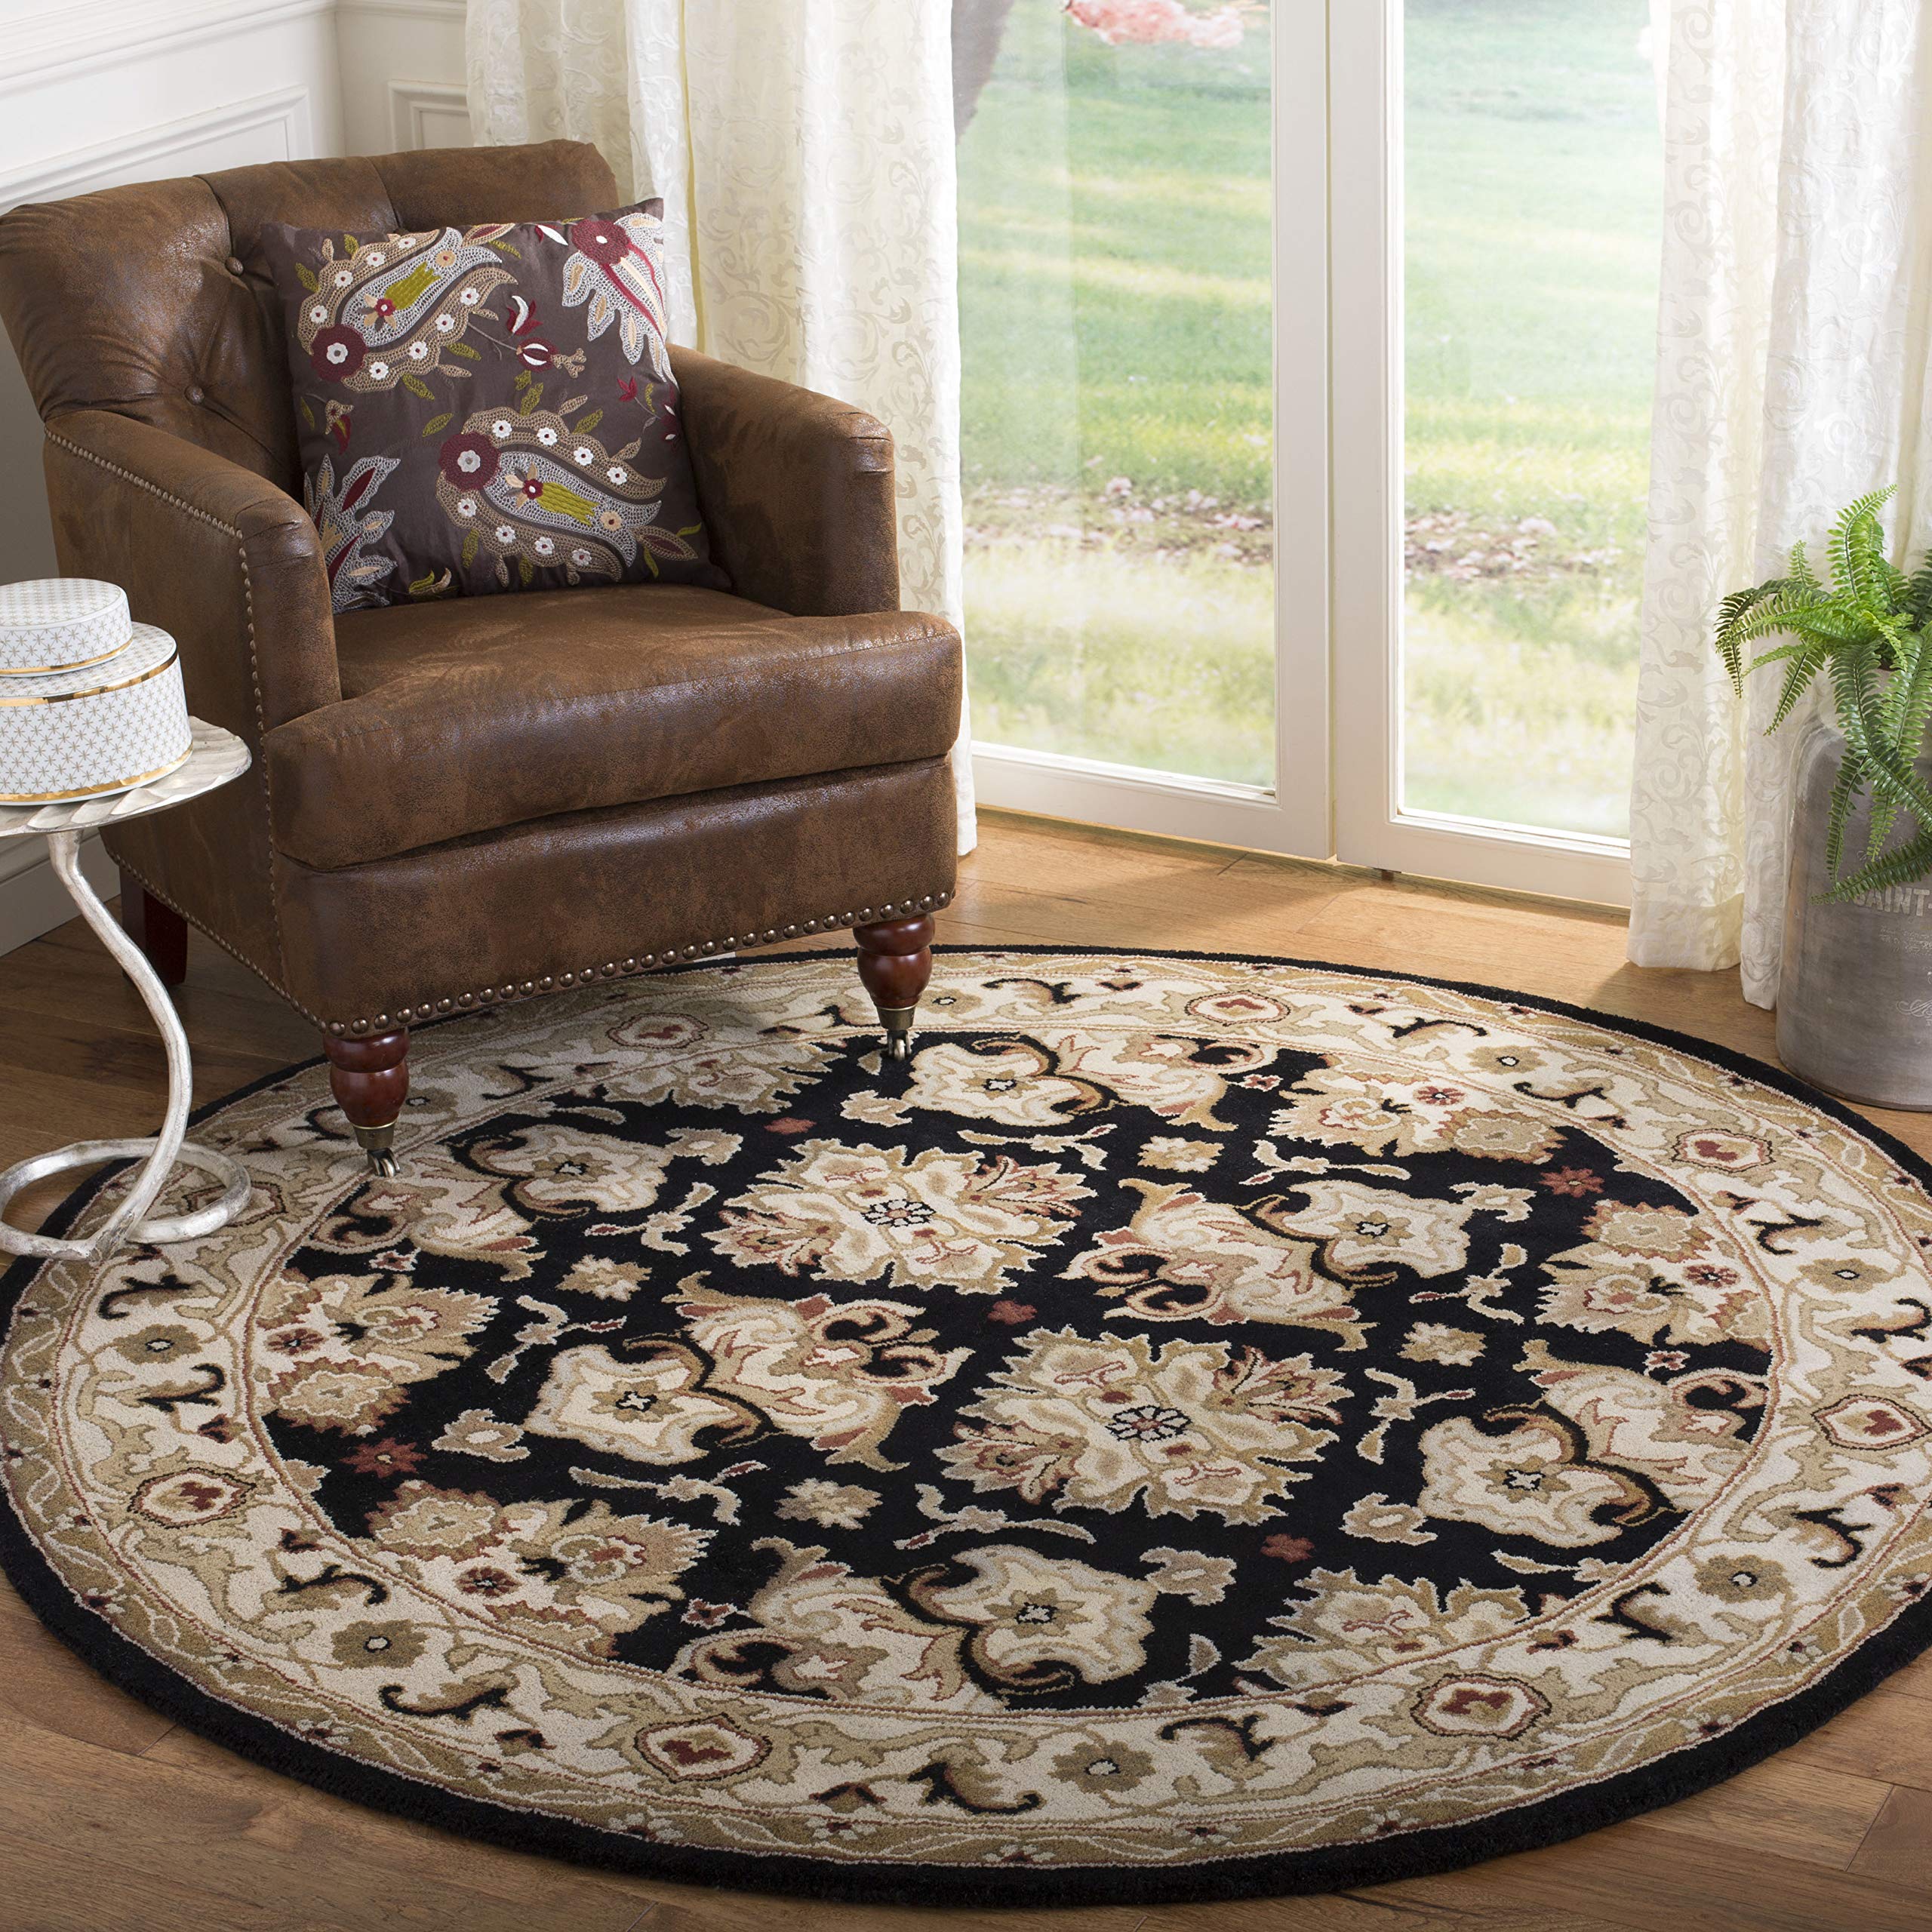 SAFAVIEH Heritage Collection 3'6" x 3'6" Round Black/Ivory HG817A Handmade Traditional Oriental Premium Wool Area Rug